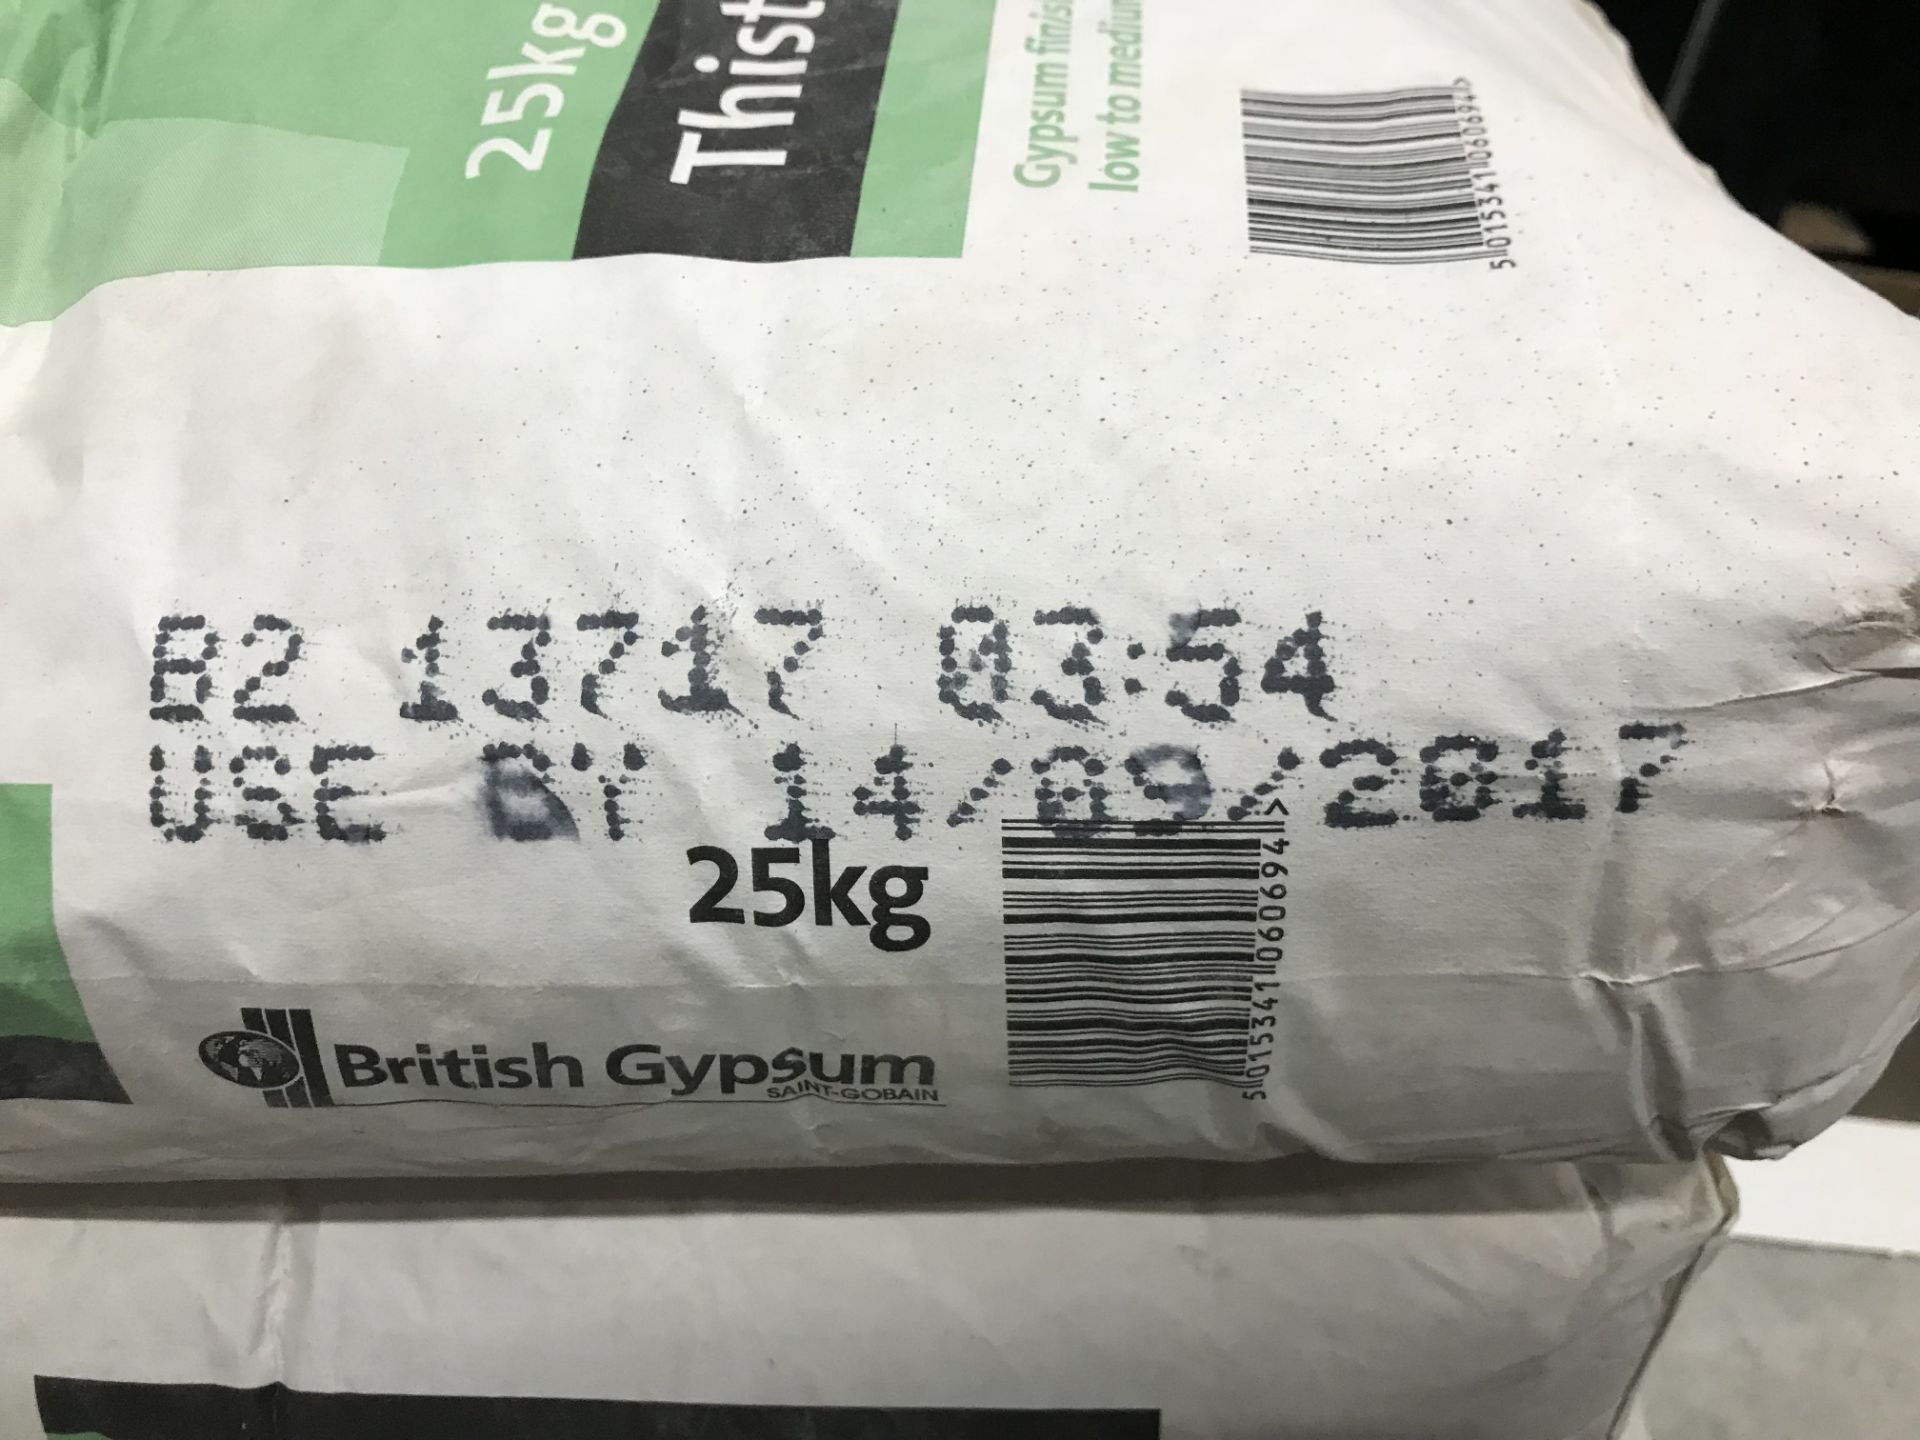 4 x 25KG Bags of British Gypsum Thistle Board Finish Cement - EXP 14/09/2017 - Image 3 of 3